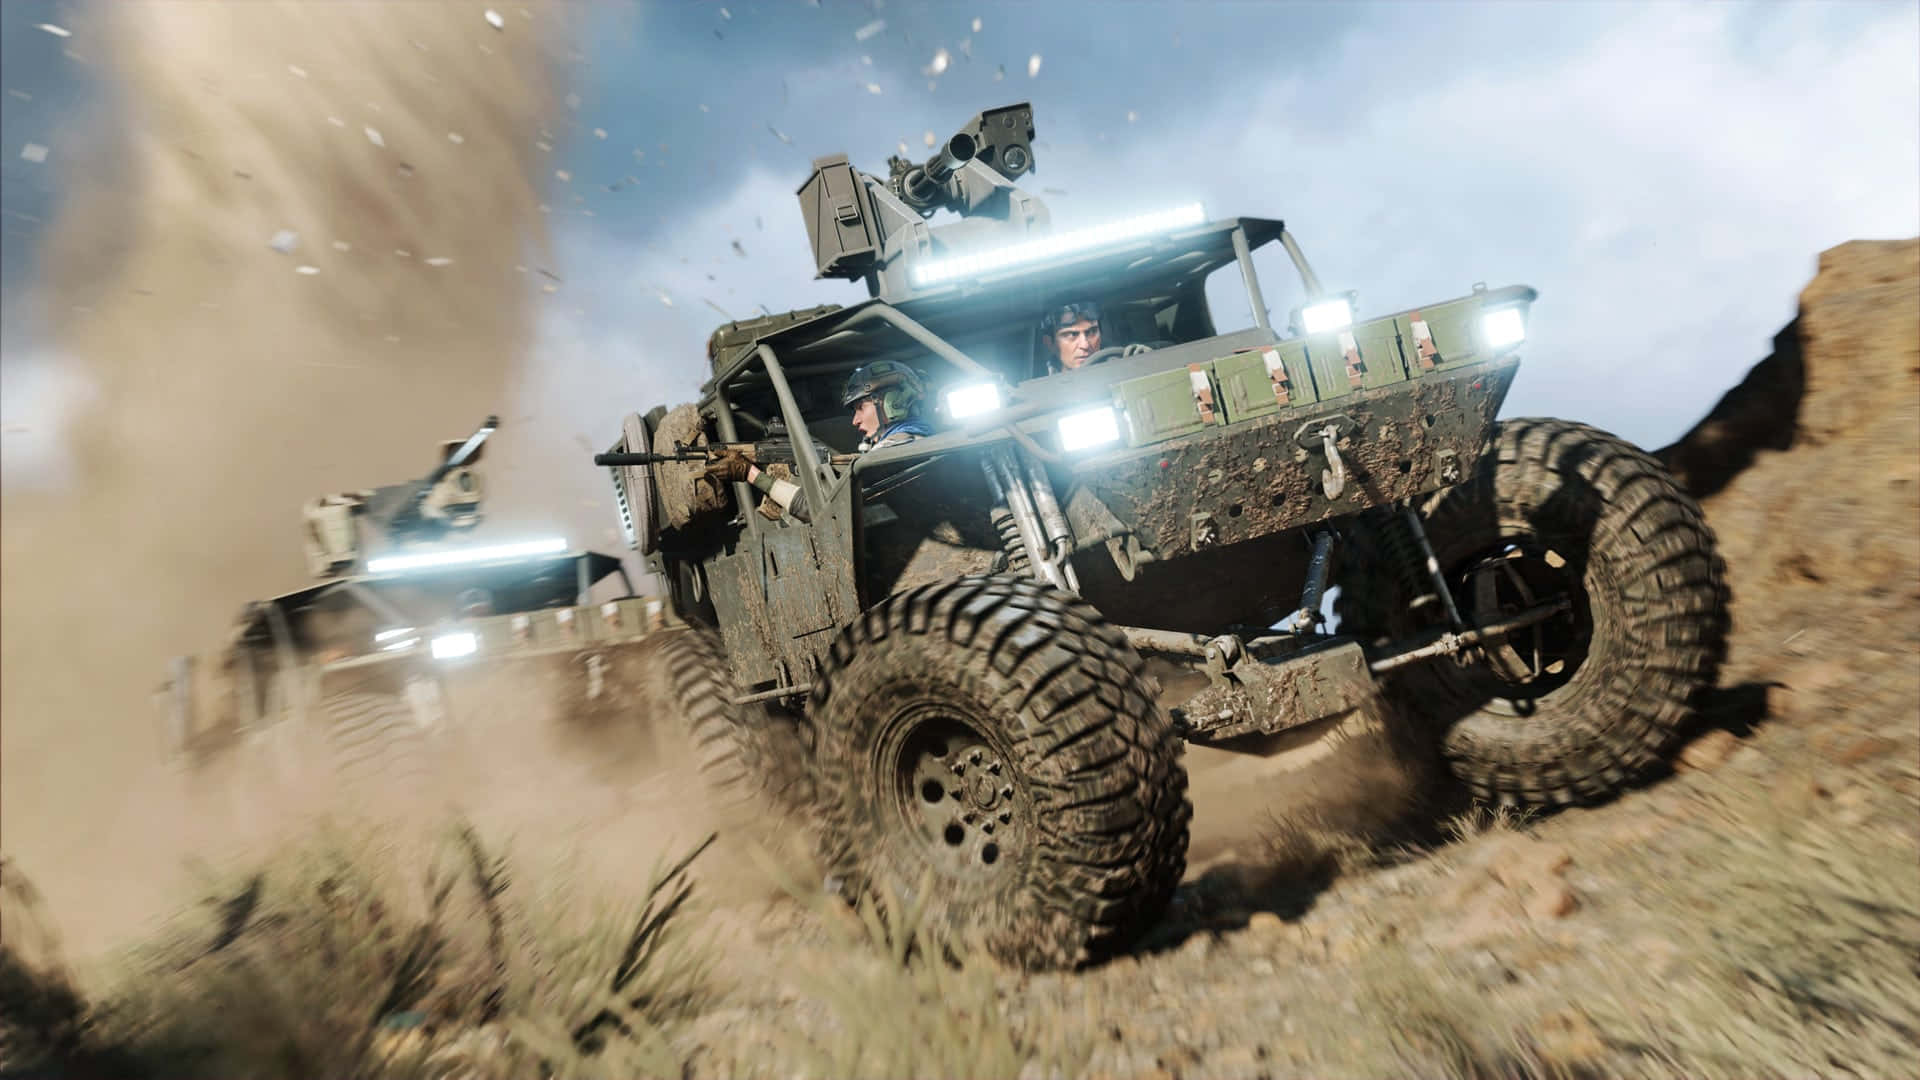 Battlefield vehicles in action during a military operation Wallpaper